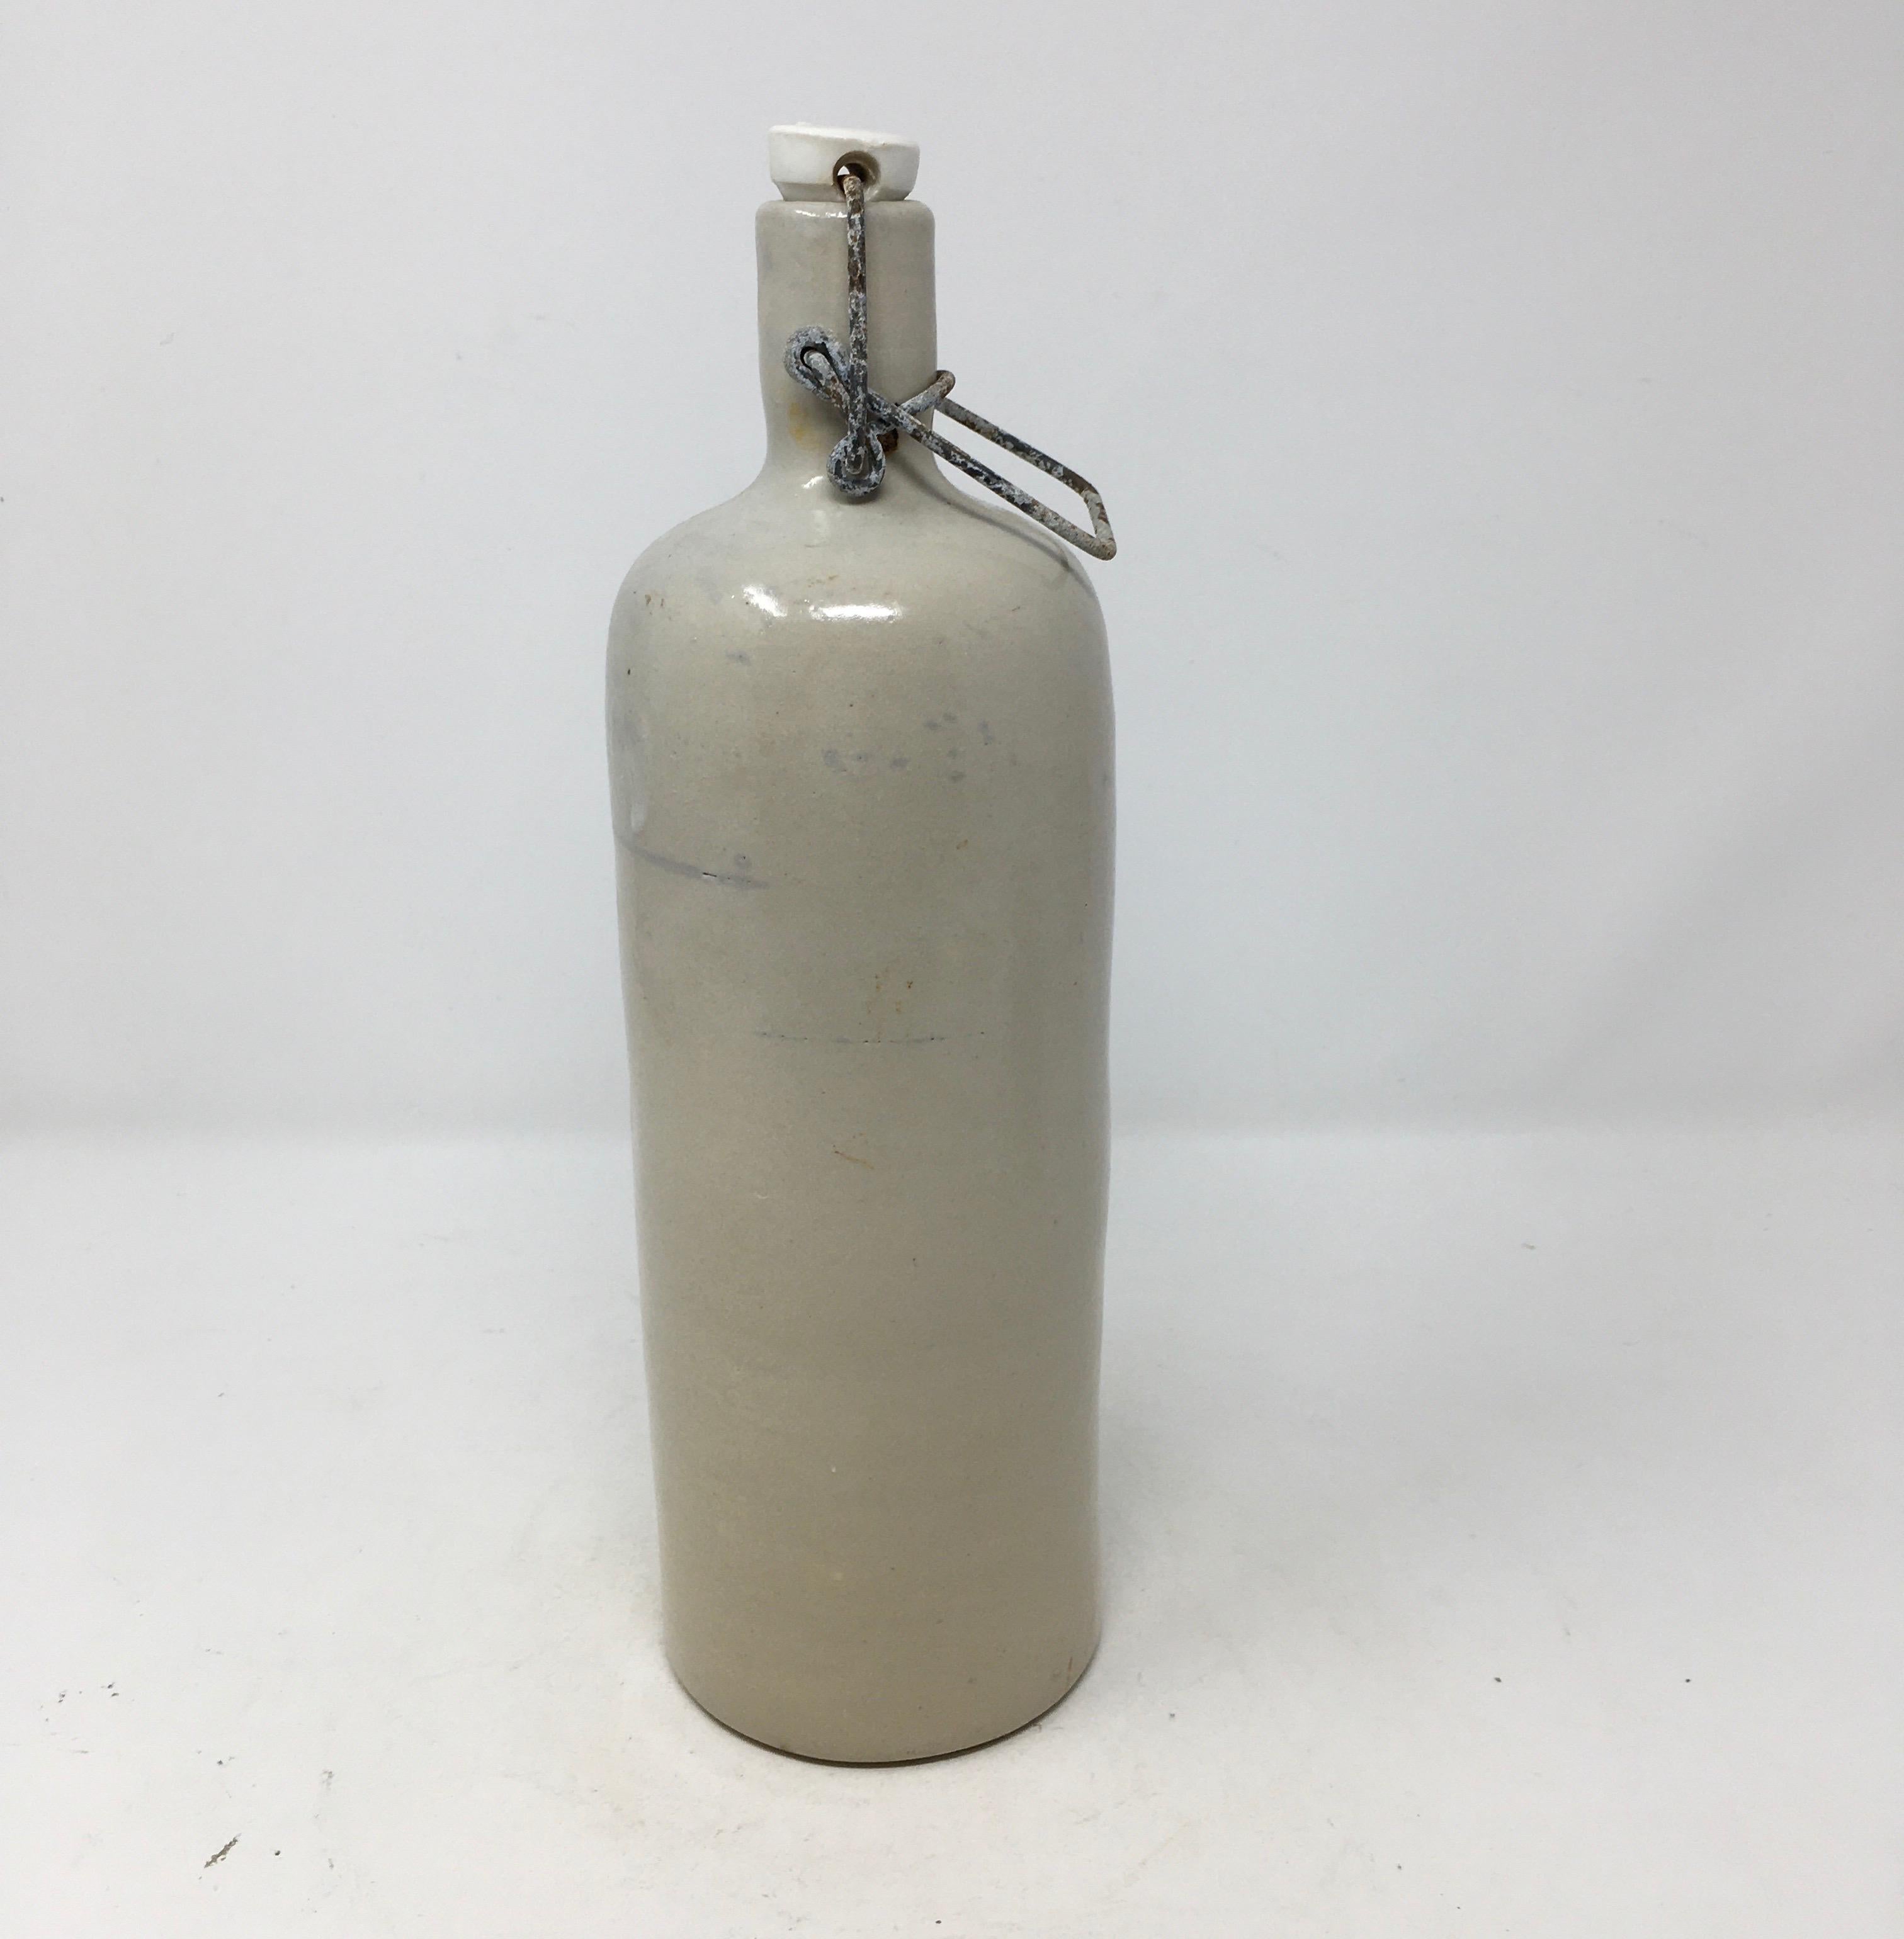 Found in the South of France this antique stoneware vinegar bottle has its original porcelain top attached. Simplistic in design the piece could be used as a kitchen accessory or as a vase for a single flower. 

This piece weighs 2 lbs.